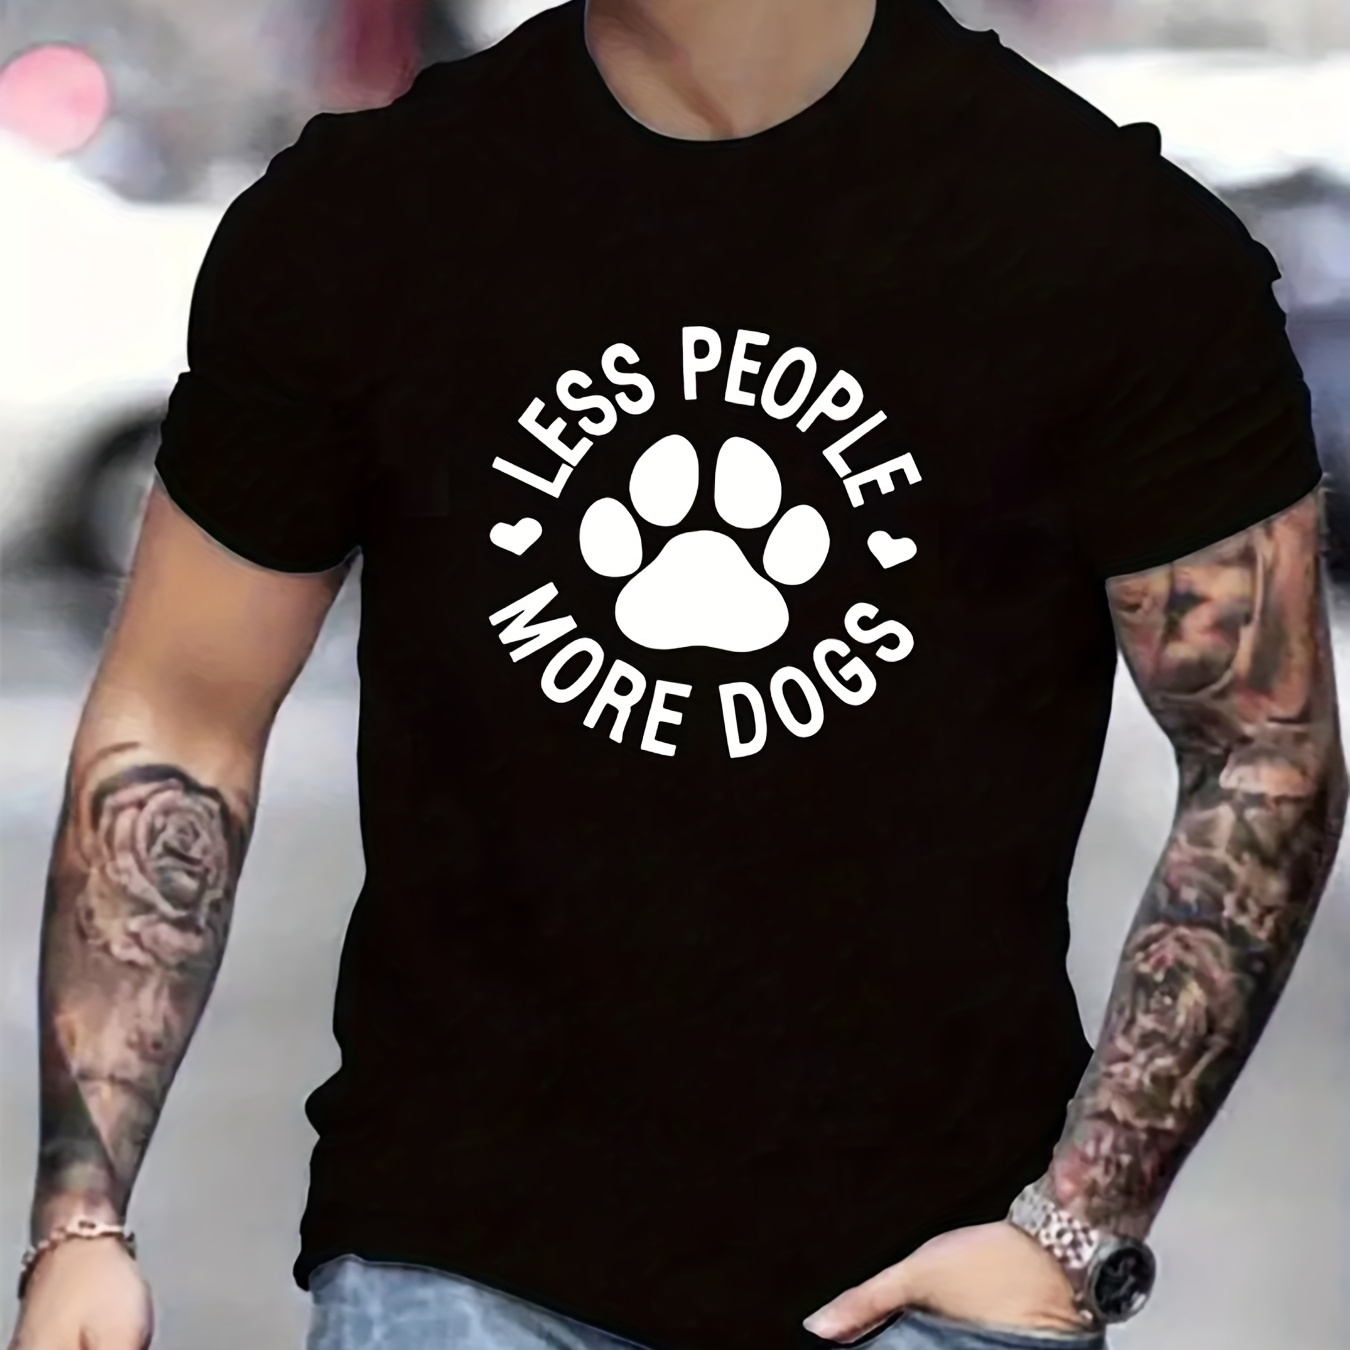 

Less People More Dogs Print T Shirt, Tees For Men, Casual Short Sleeve T-shirt For Summer